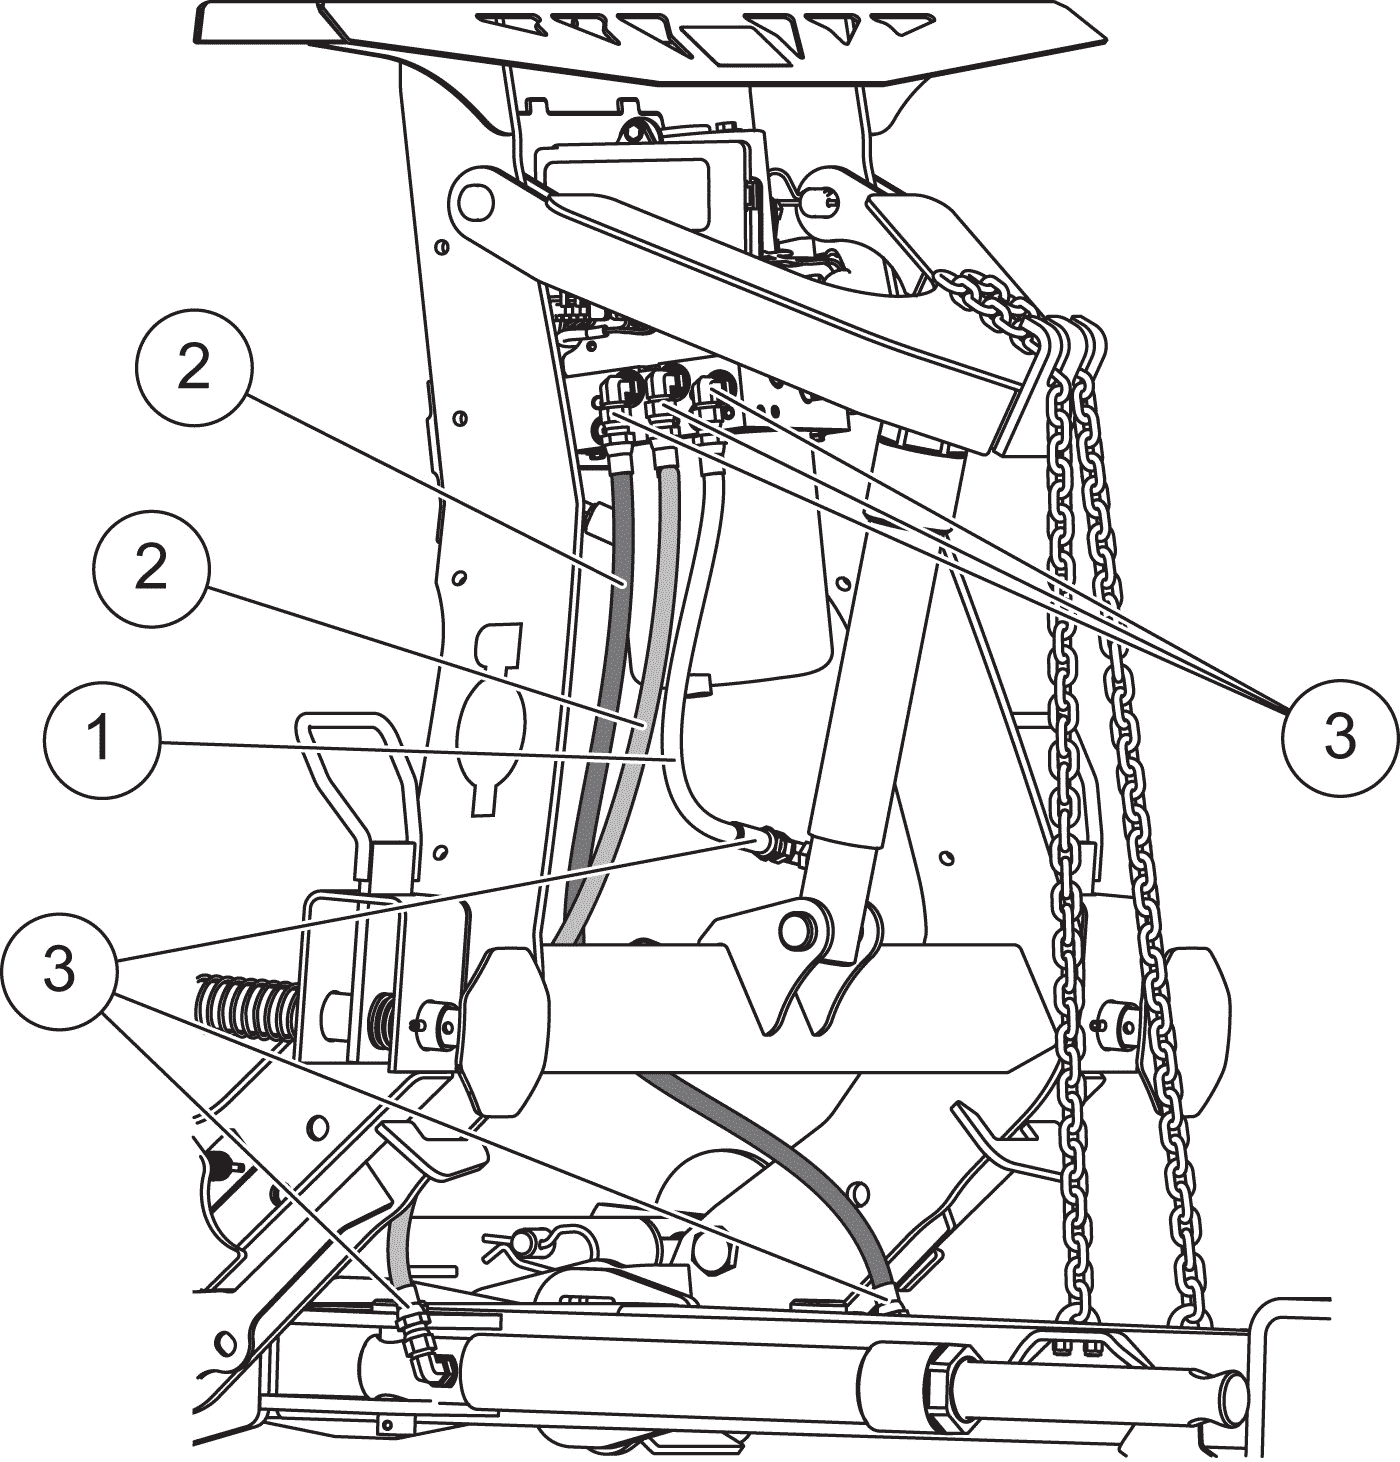 Pro-Plow-and-Pro-Plus-Hoses-and-Fittings-Diagram